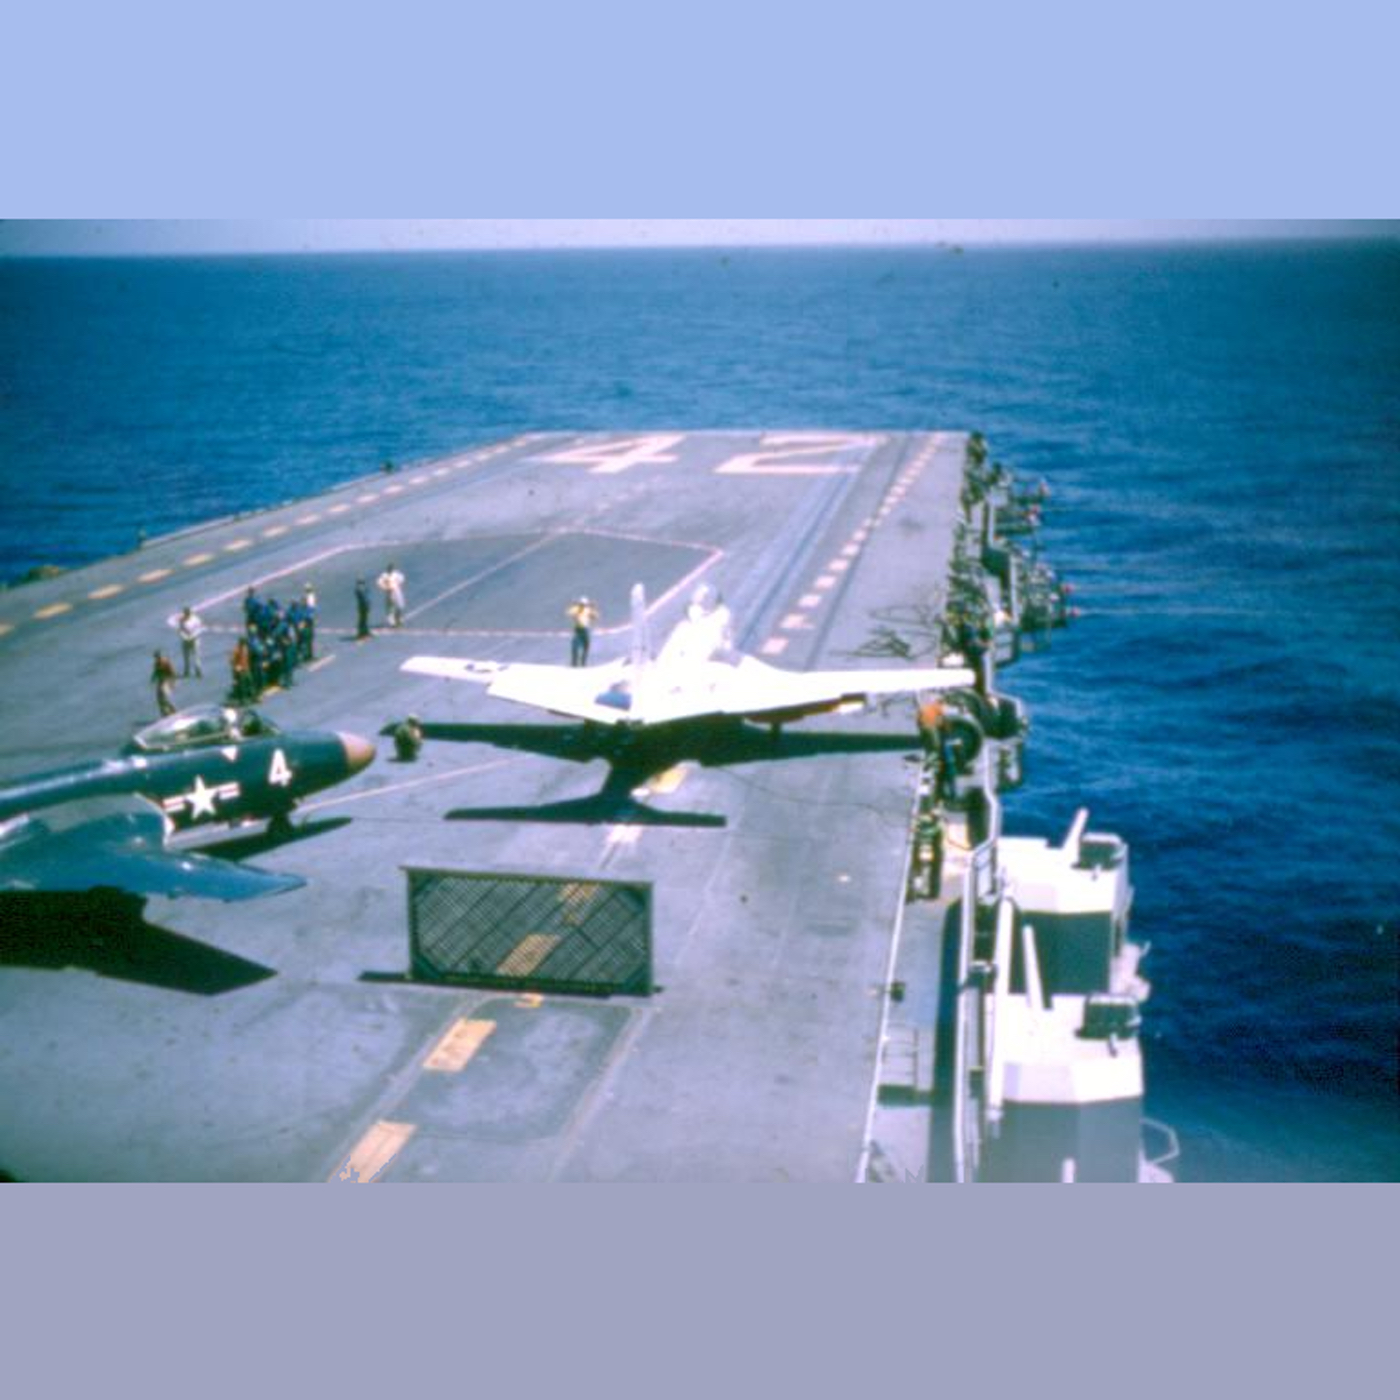 Cougar Lined up for Takeoff from the USS Roosevelt